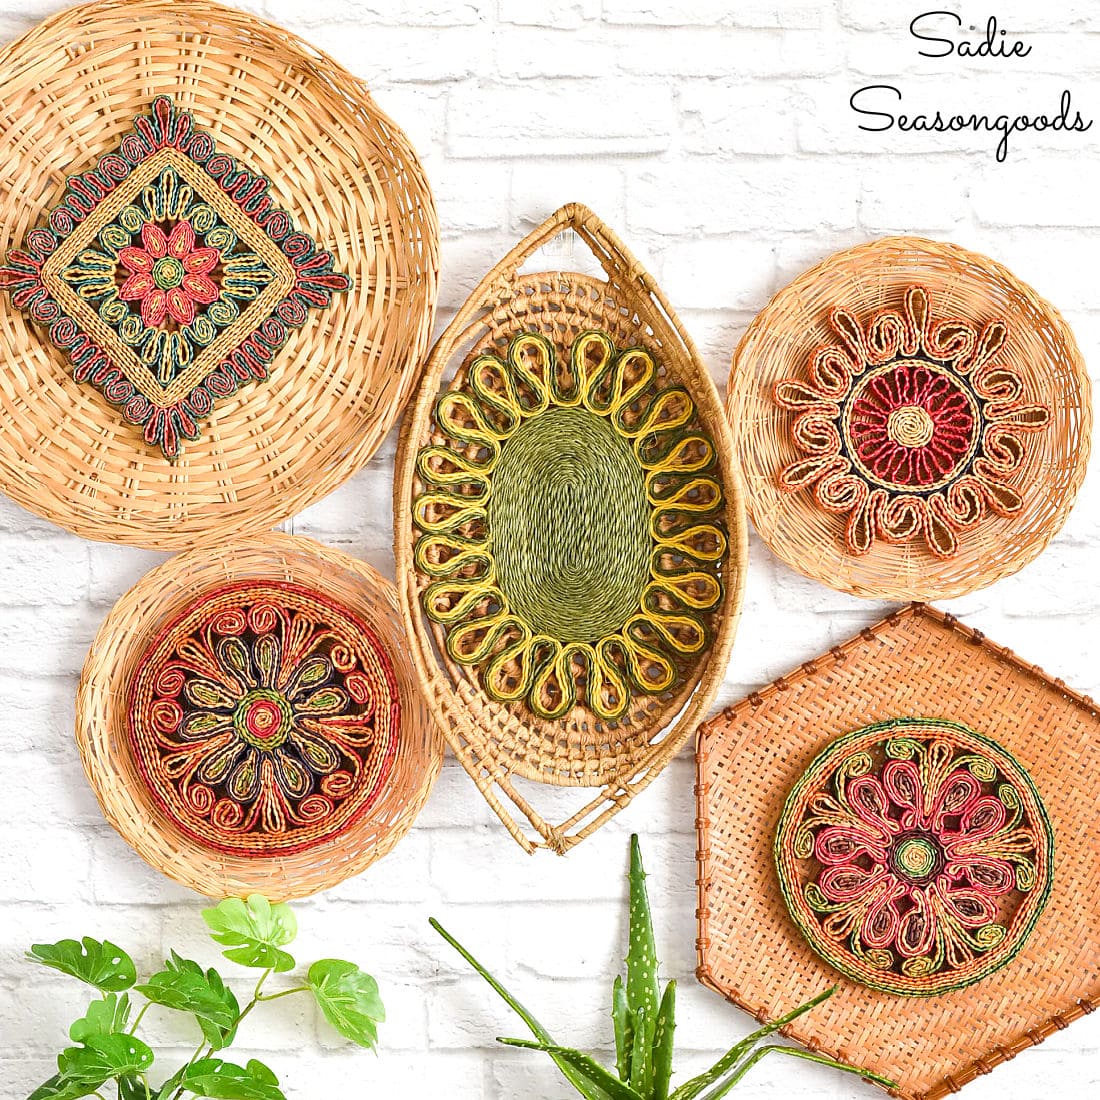 Basket Wall Decor with Bohemian Design from the Thrift Store